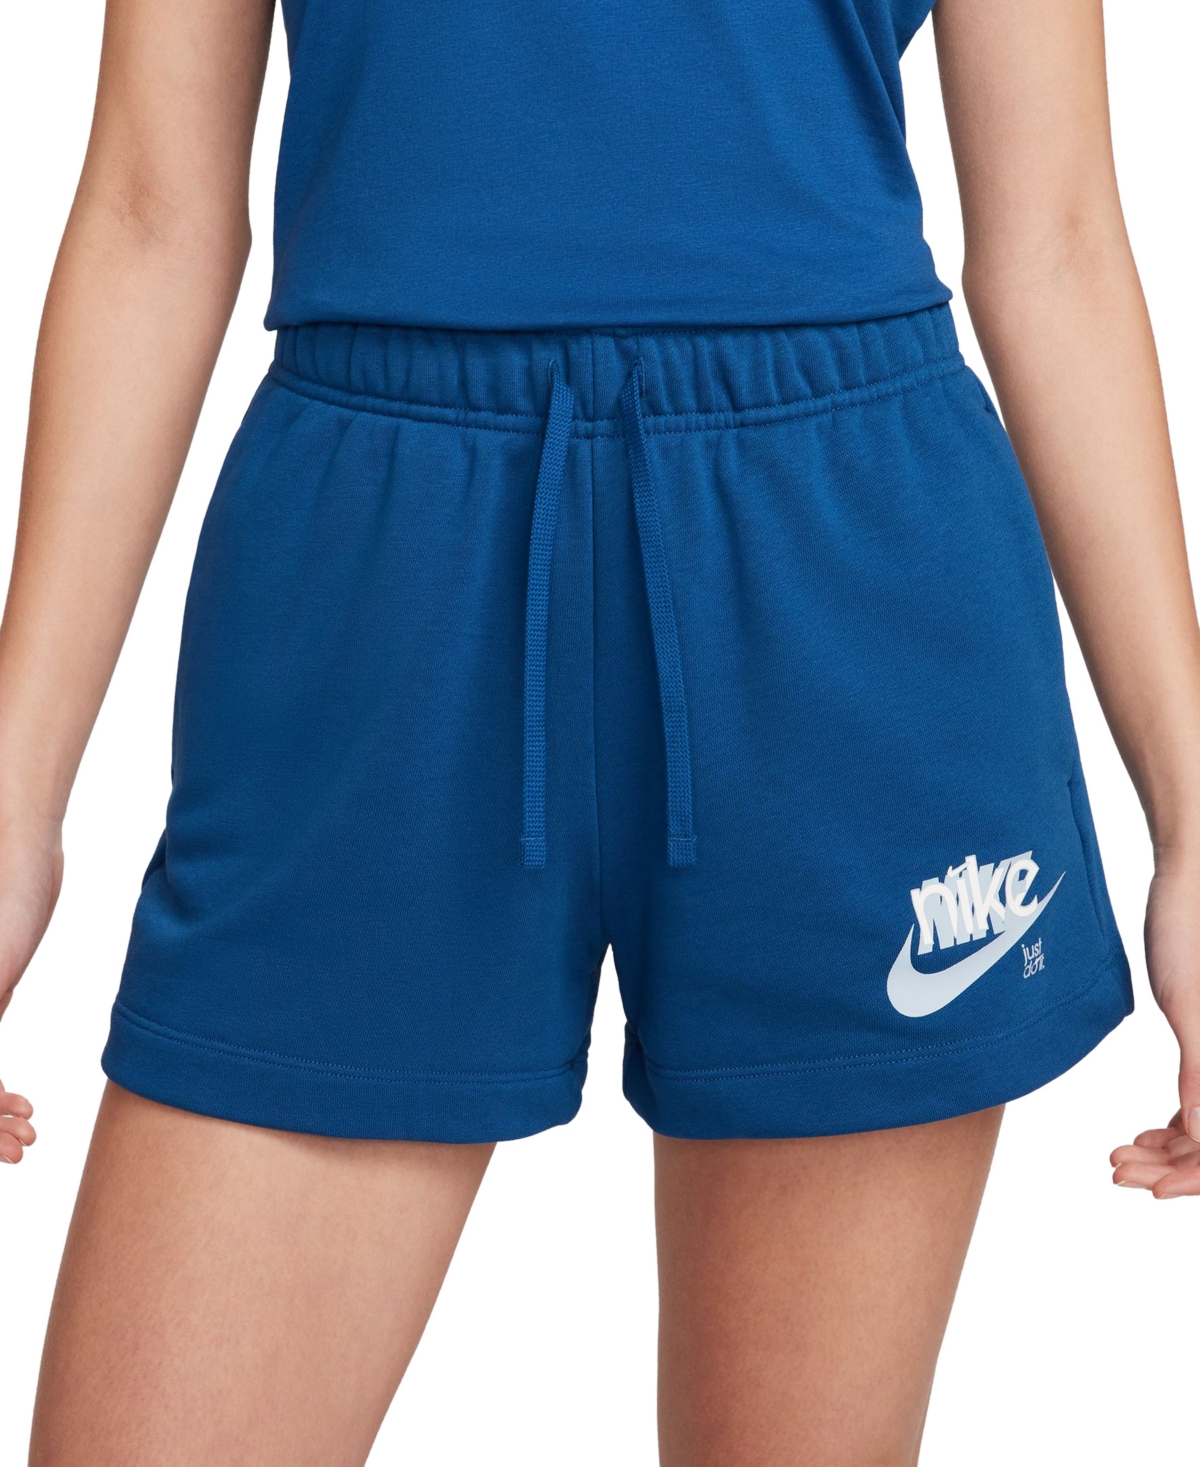 Women's Sportswear Club French Terry Graphic Fleece Shorts - Court Blue/lt Armory Blue/white